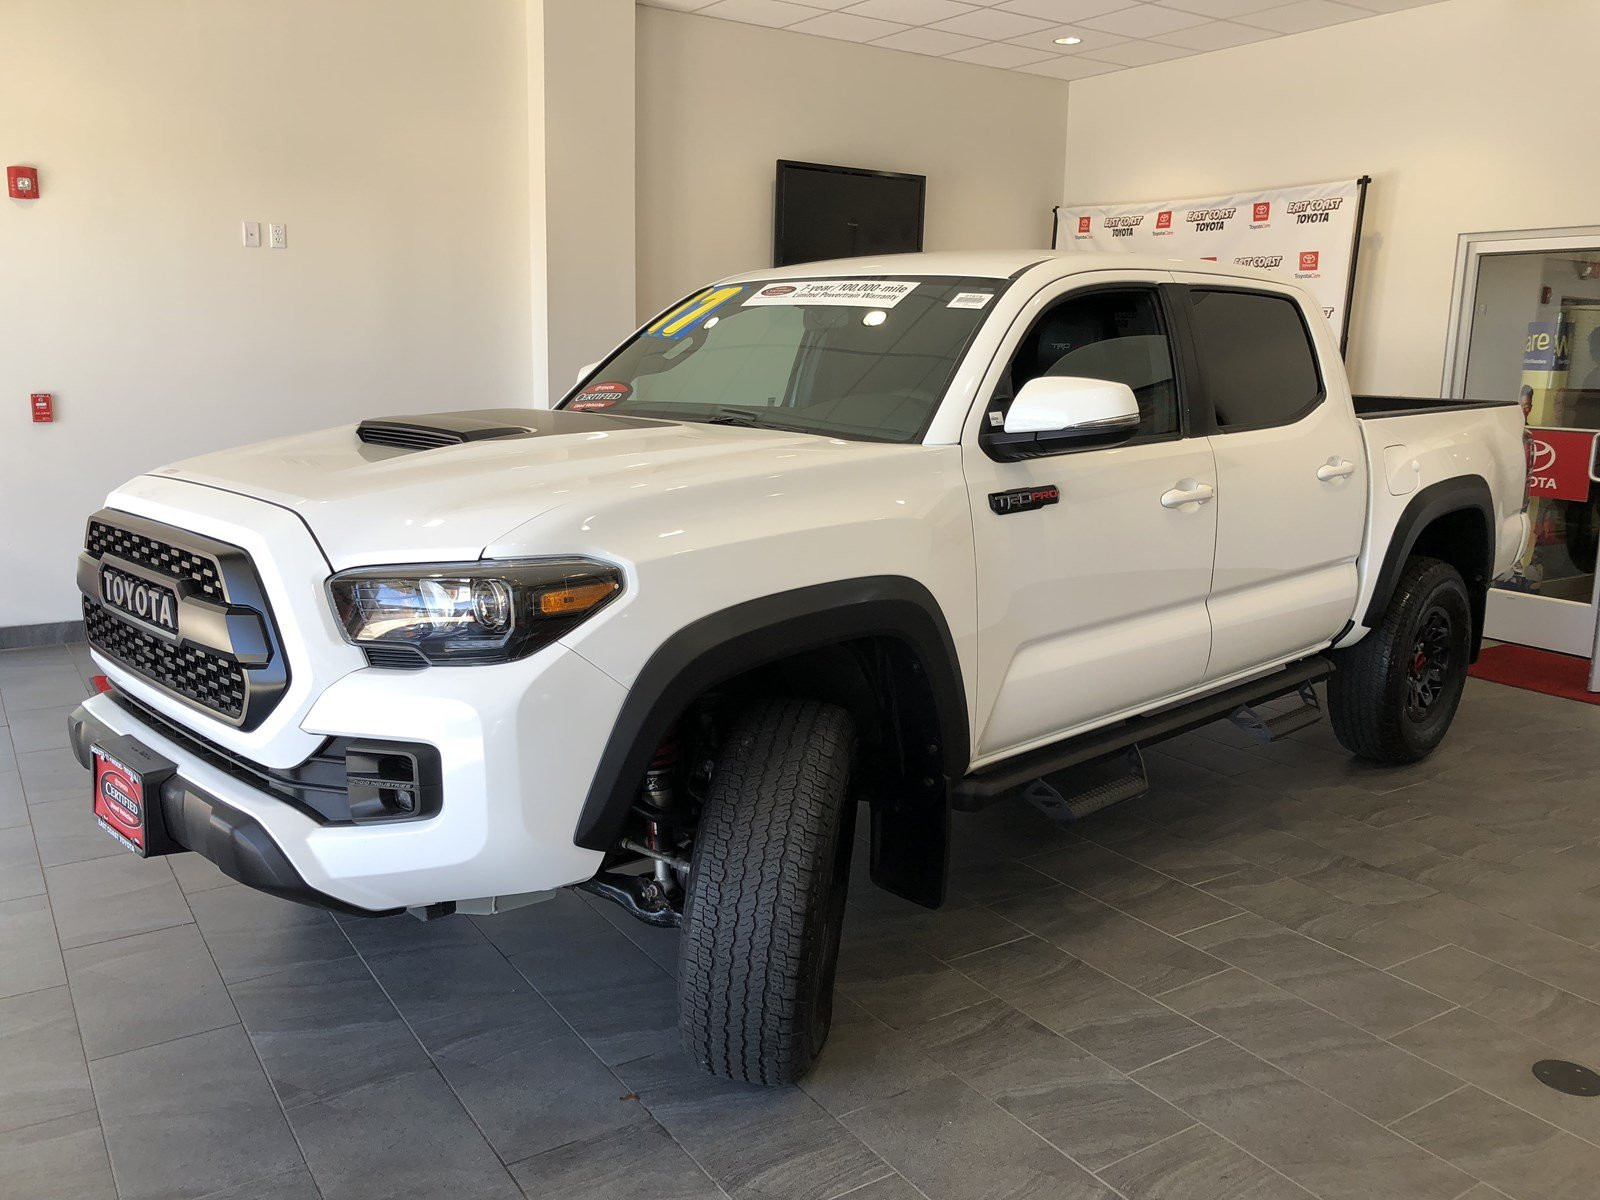 hardwood floor repair tacoma of certified pre owned 2017 toyota tacoma trd pro v6 4wd manual dbl cab throughout certified pre owned 2017 toyota tacoma trd pro v6 4wd manual dbl cab